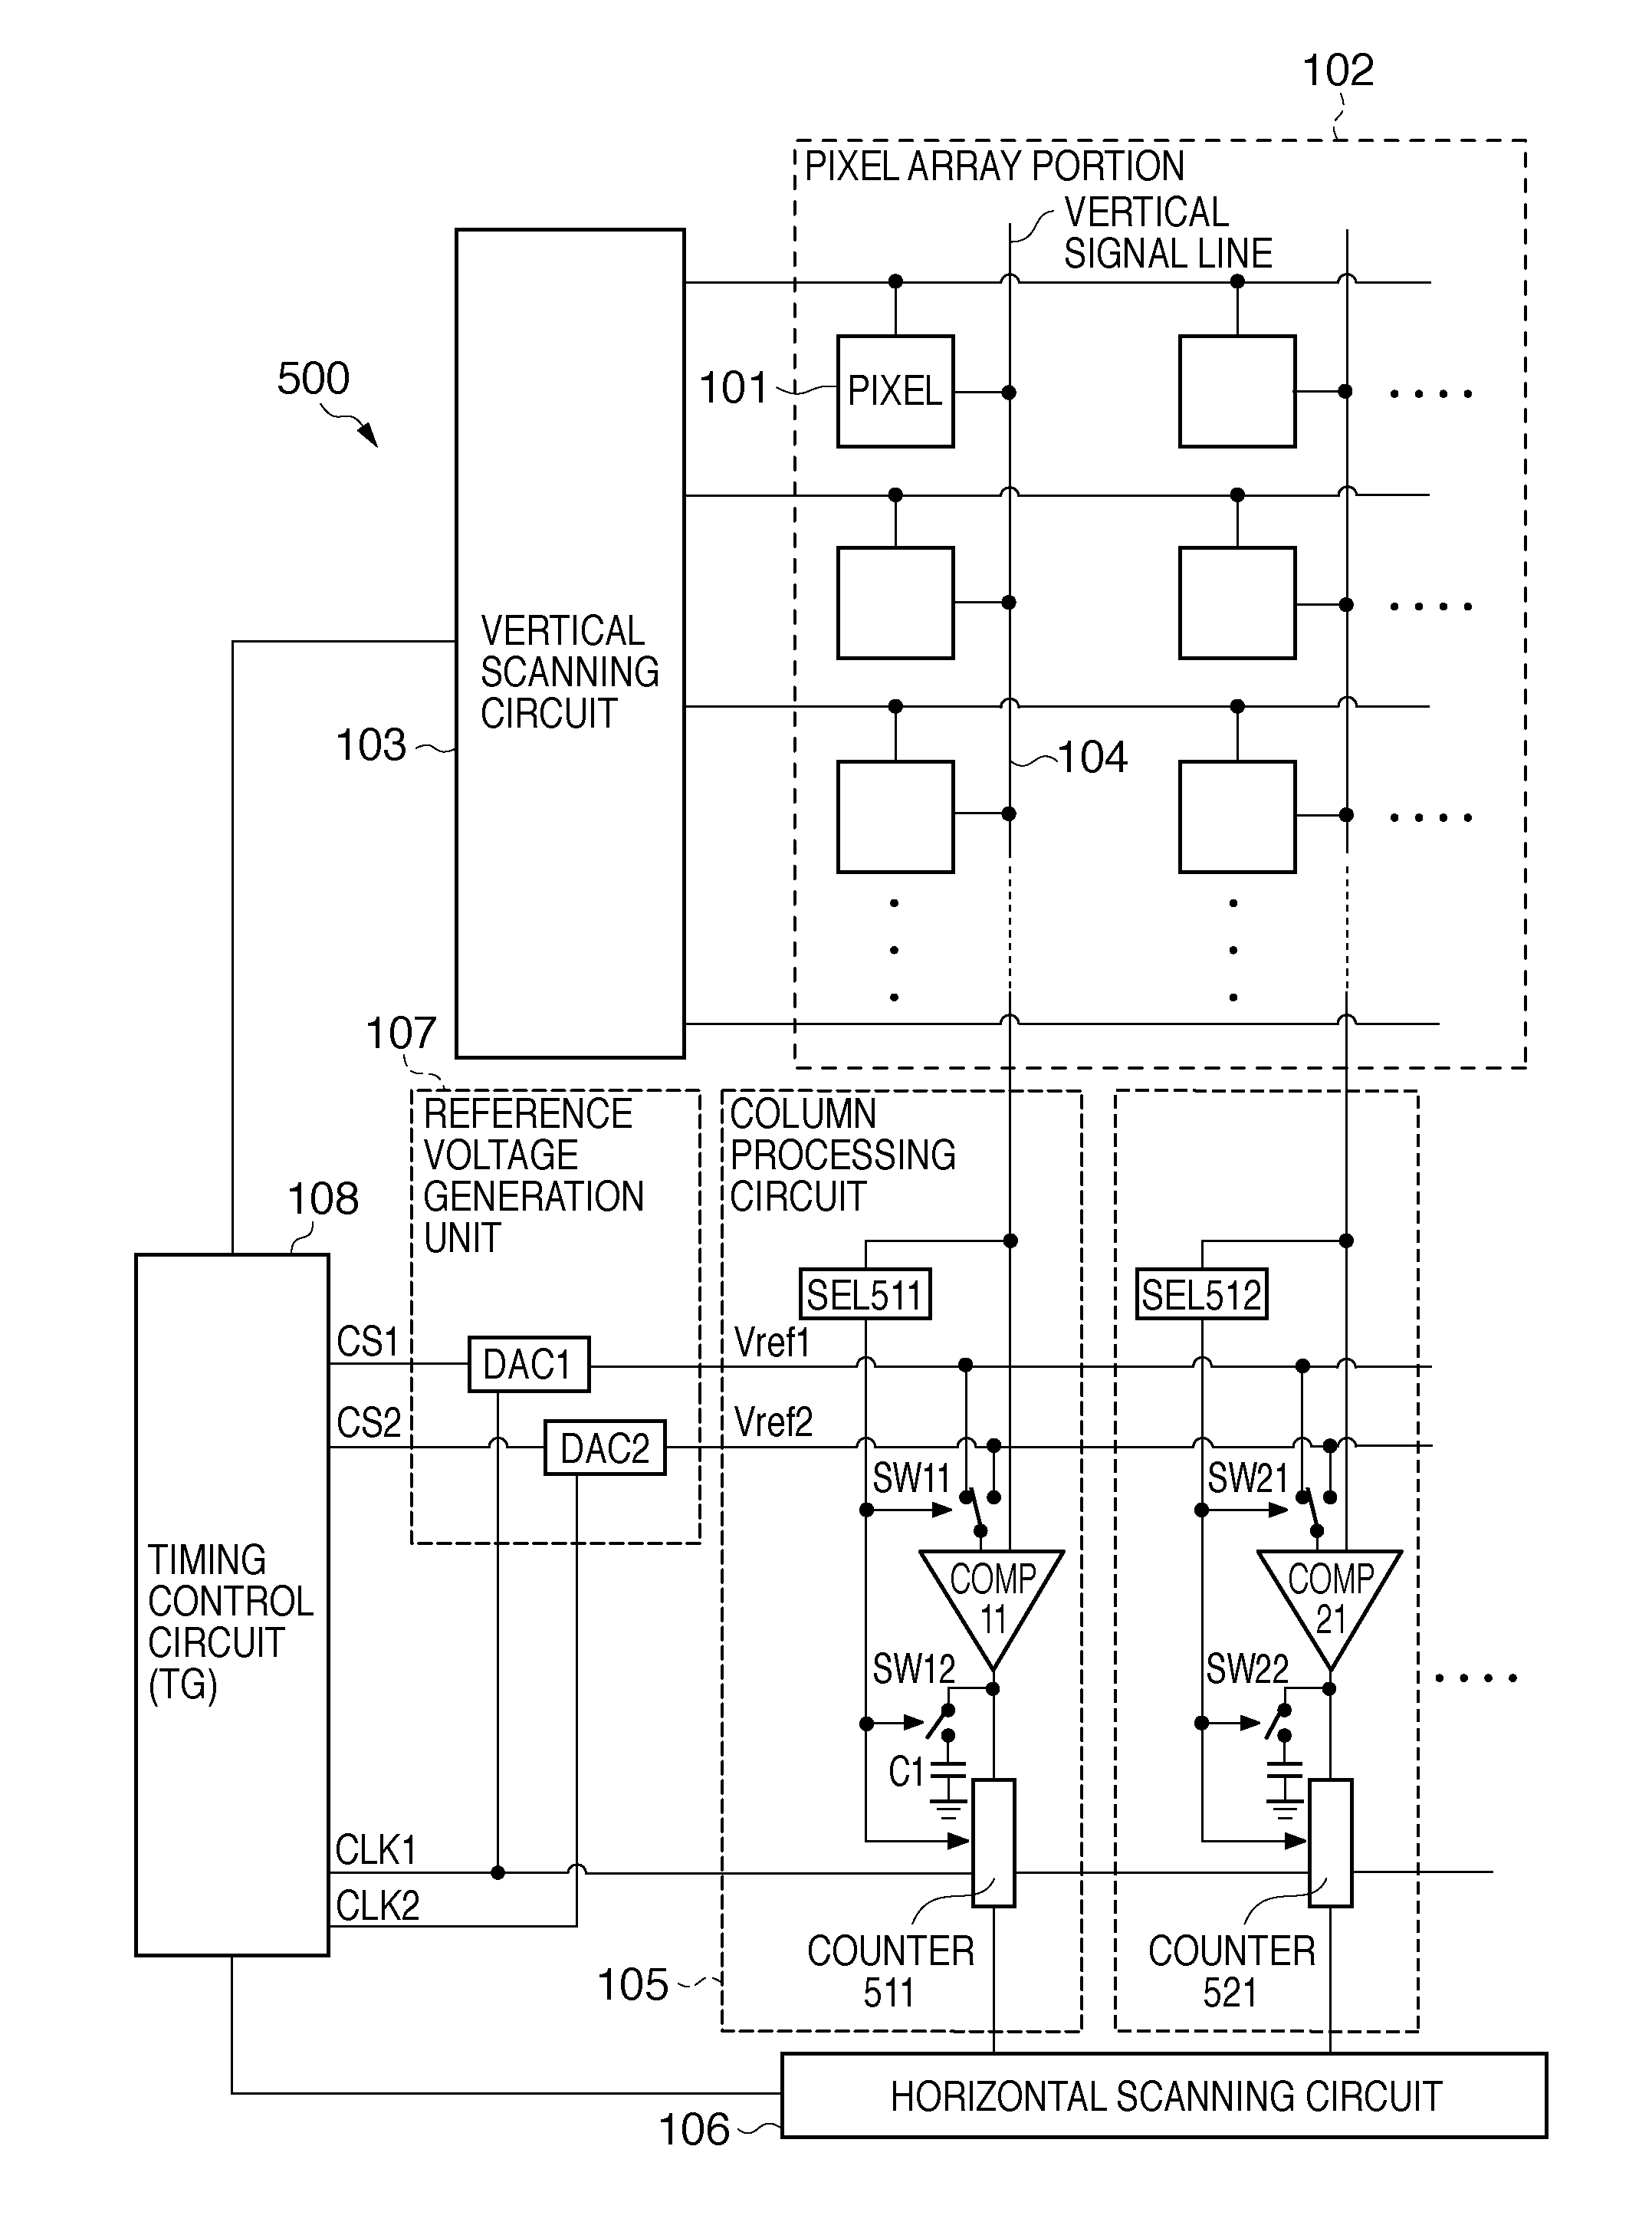 Solid-state image sensing element and image sensing system including comparison units with switchable frequency band characteristics